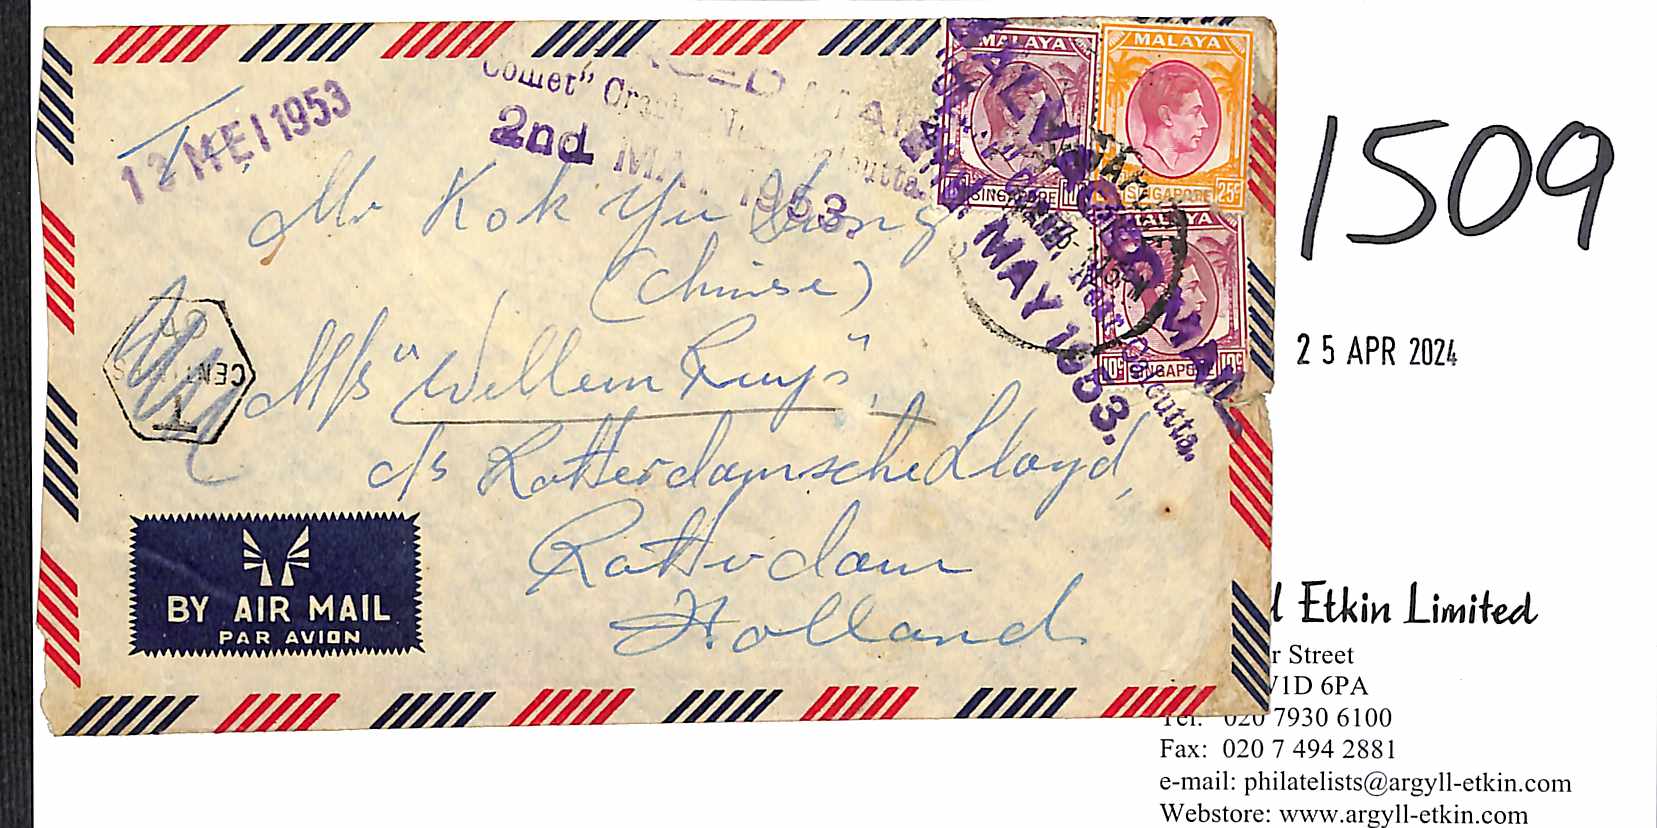 1953 (May 1) Cover from Singapore to a sailor on M/S "Willem Ruys" at Rotterdam franked 60c, with